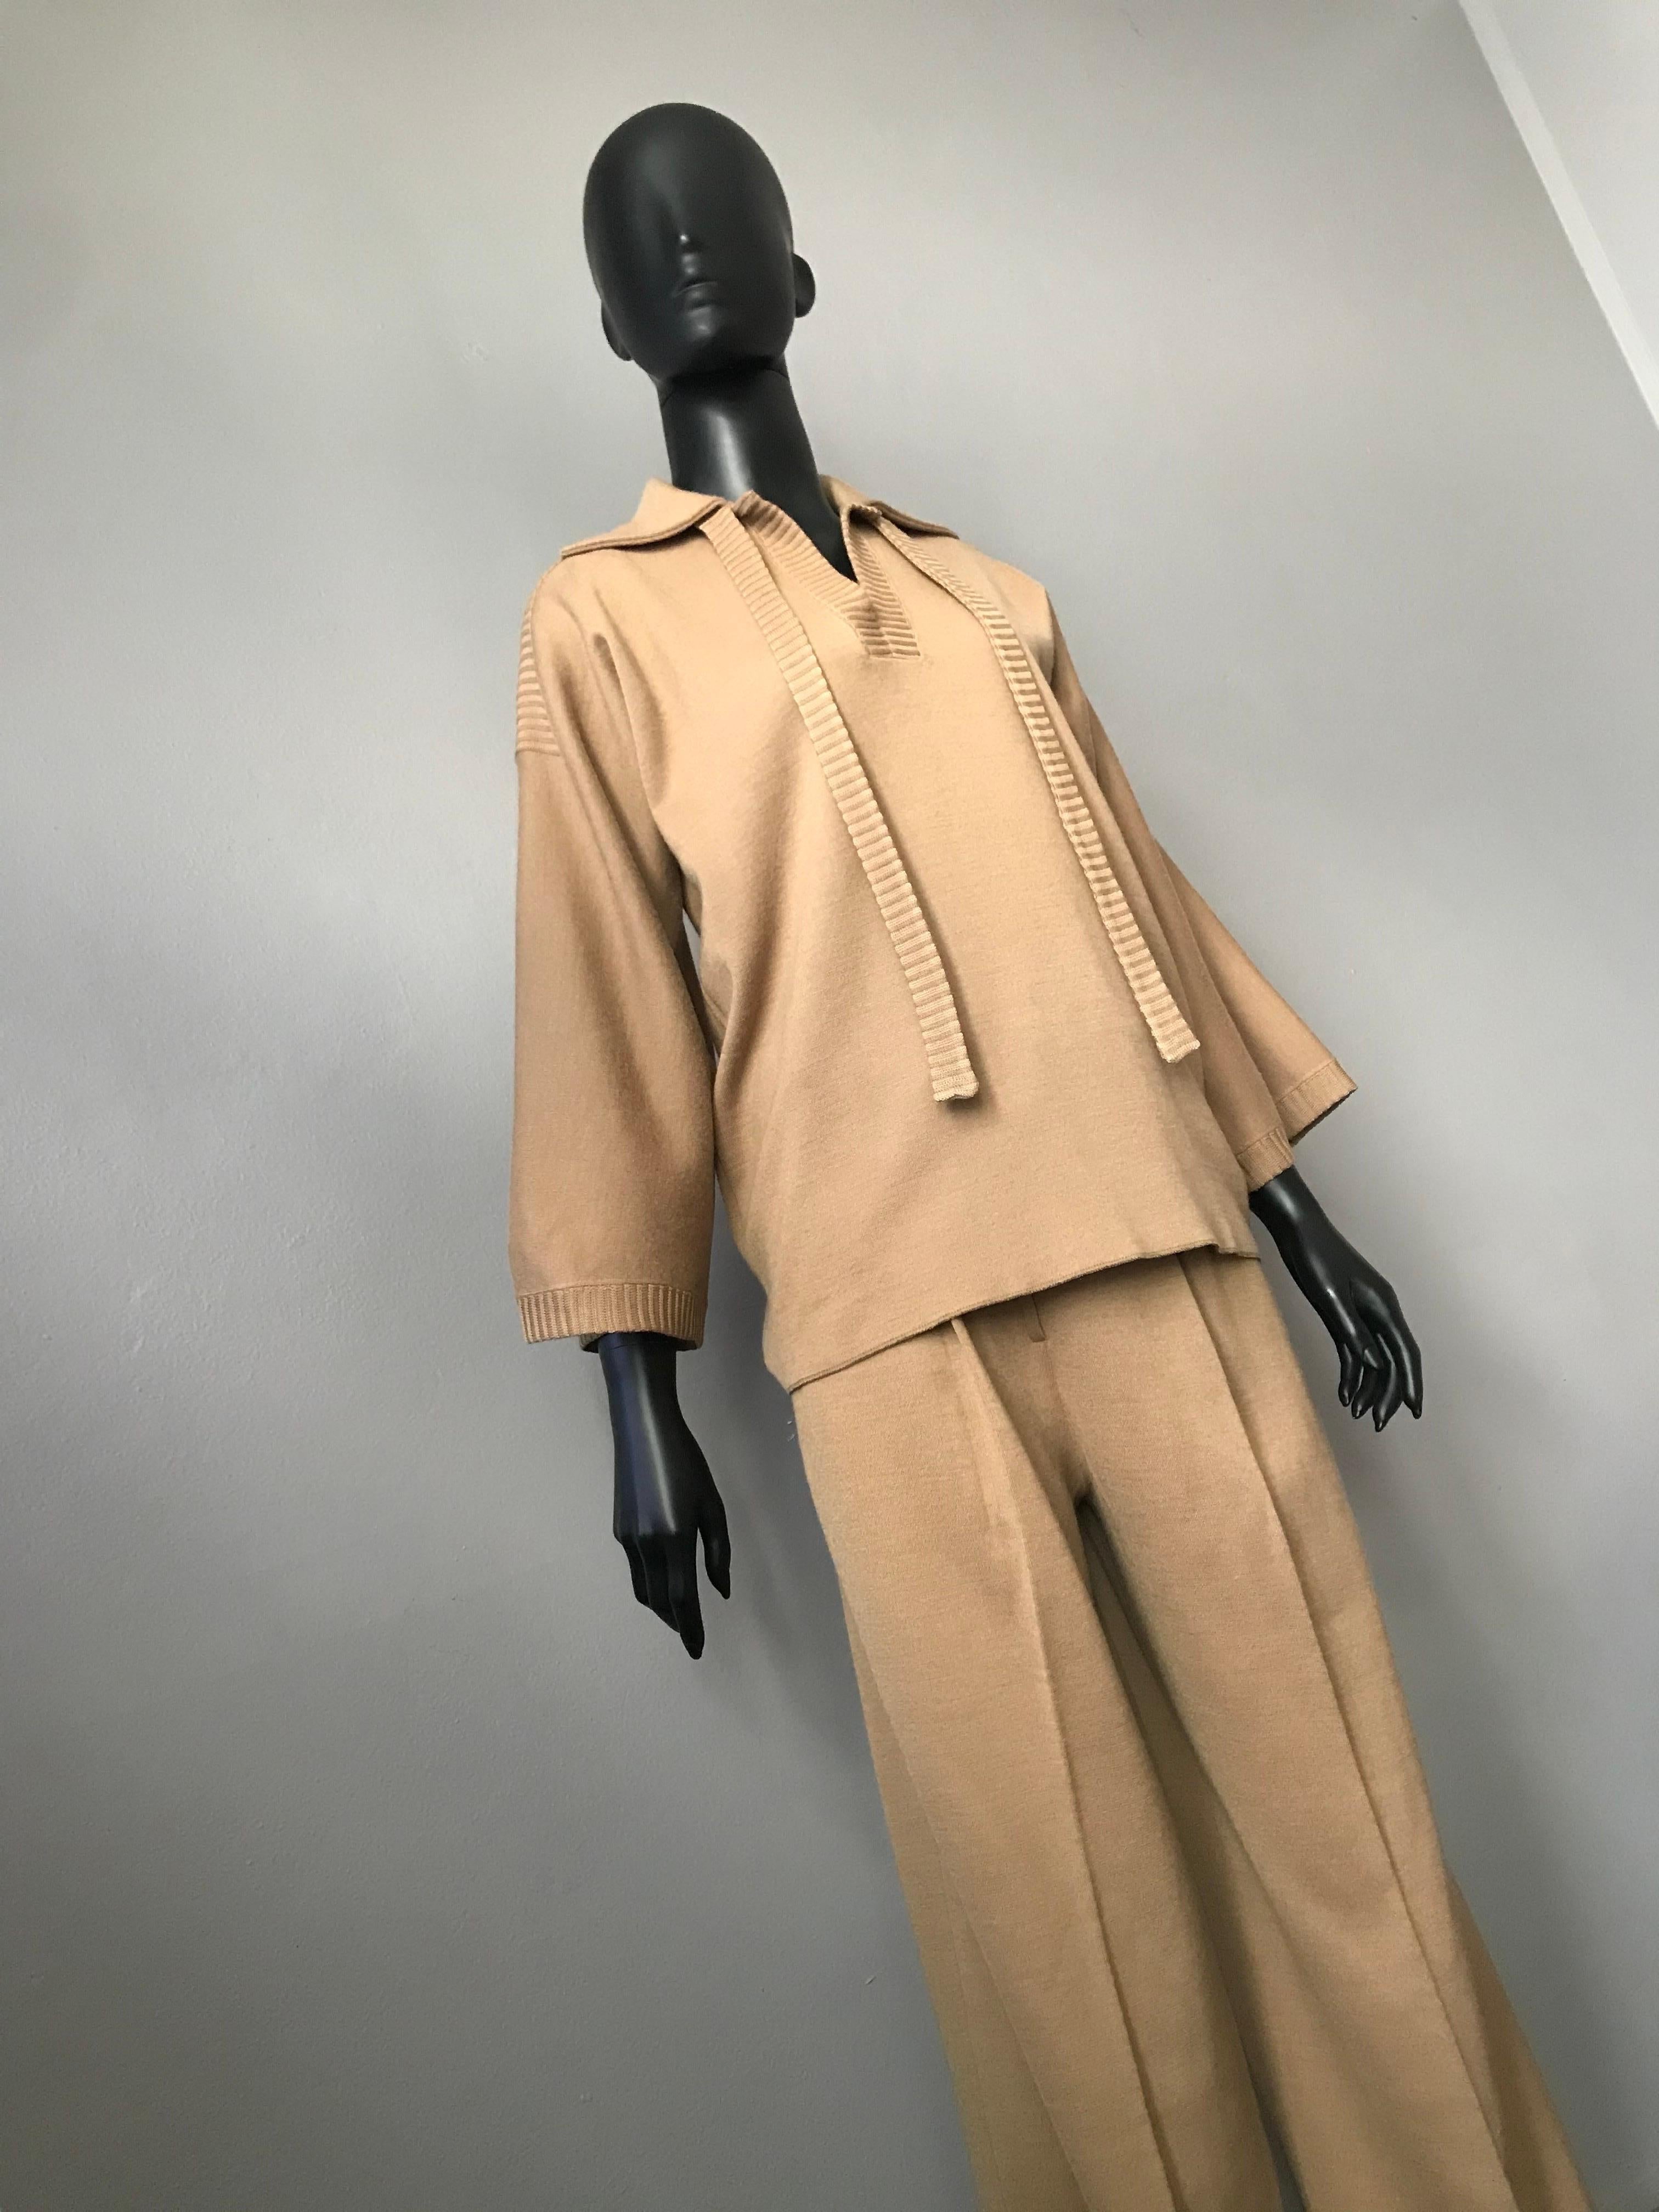 1970’s super chic Callaghan (designed by Gianni Versace) mohair winter pant suit with flared trousers and unique knit top with flared sleeves & ribbing trim.

Great camel colour that is very contemporary but has vintage style and shape

Never been